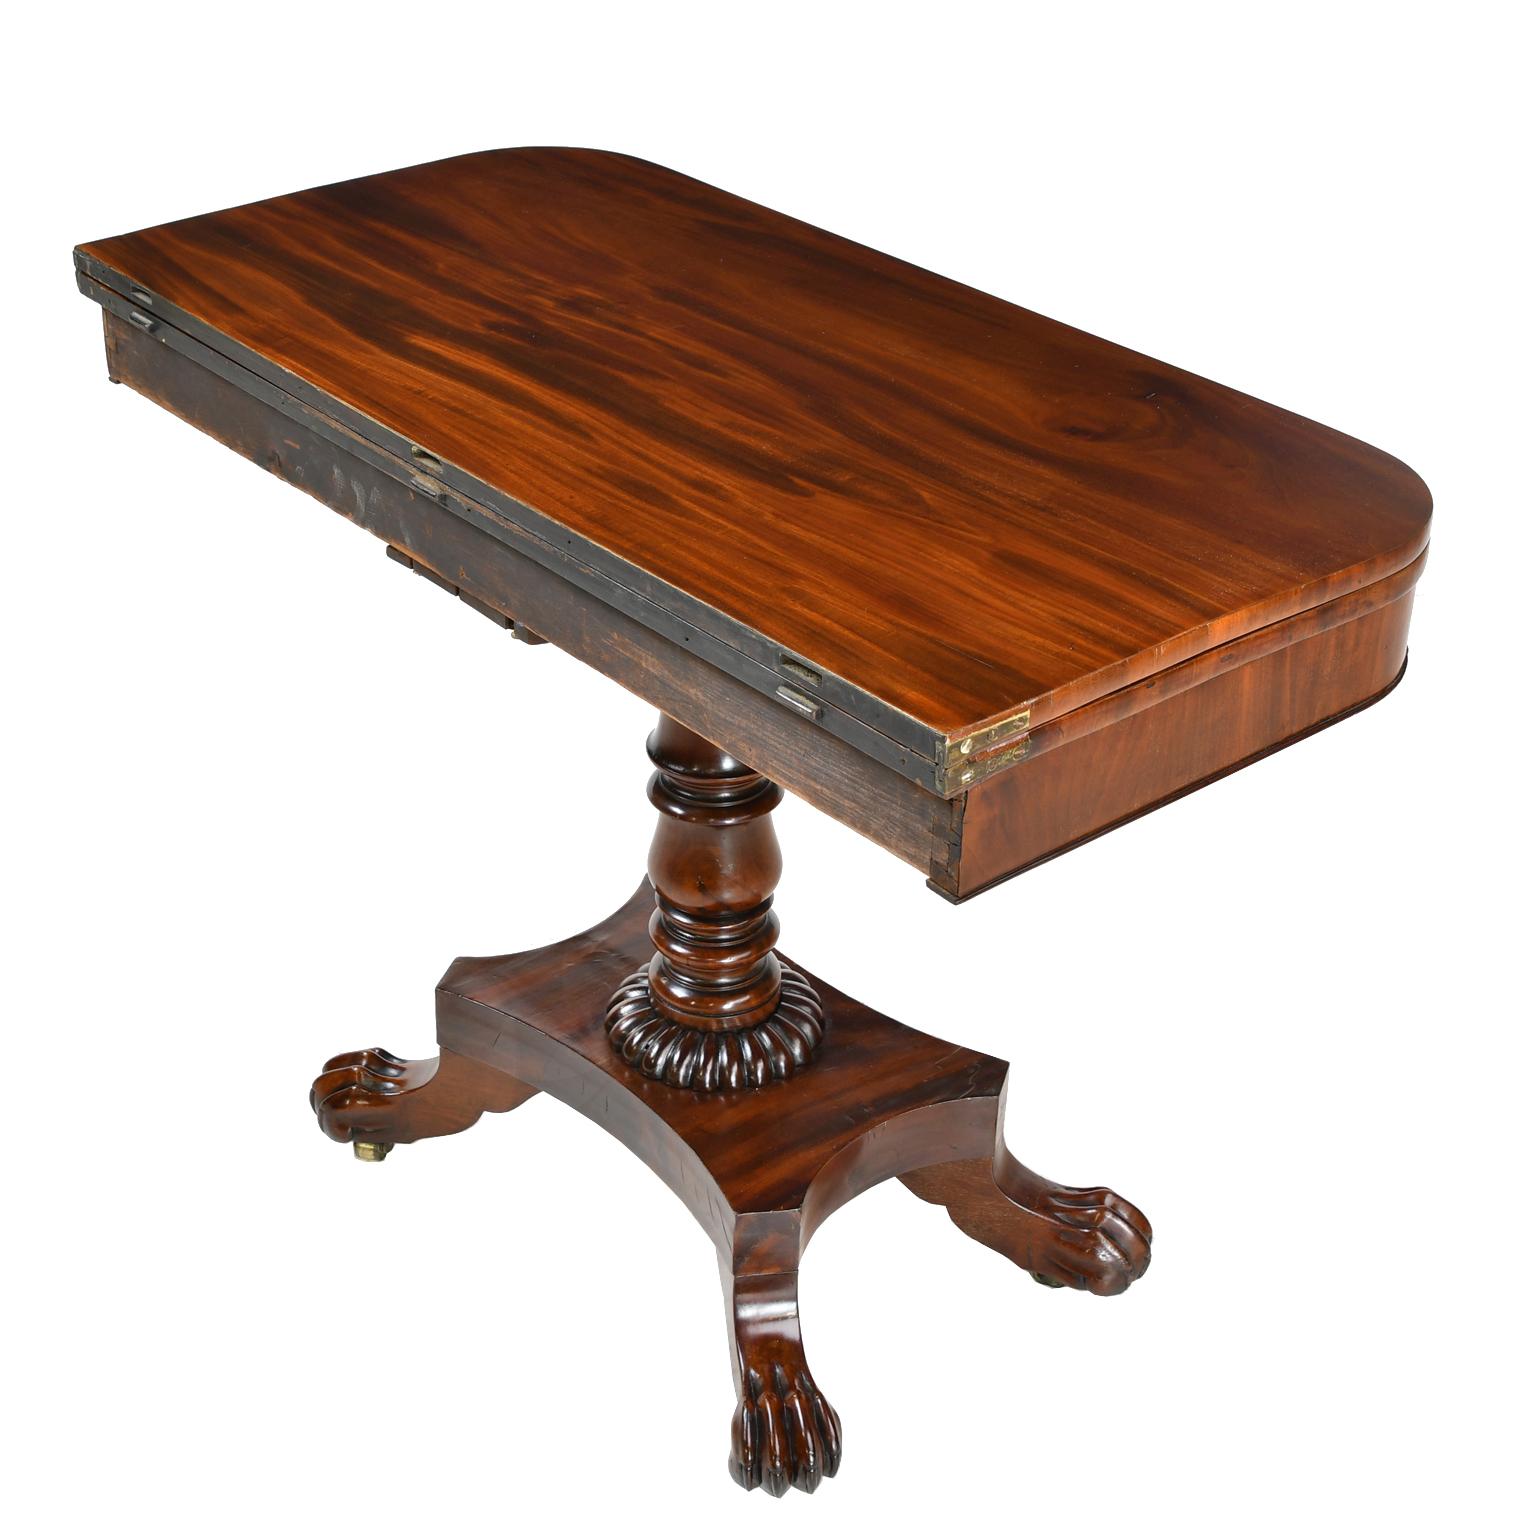 Turned Antique American Empire Game/Card Table in West Indies Mahogany, circa 1830 For Sale